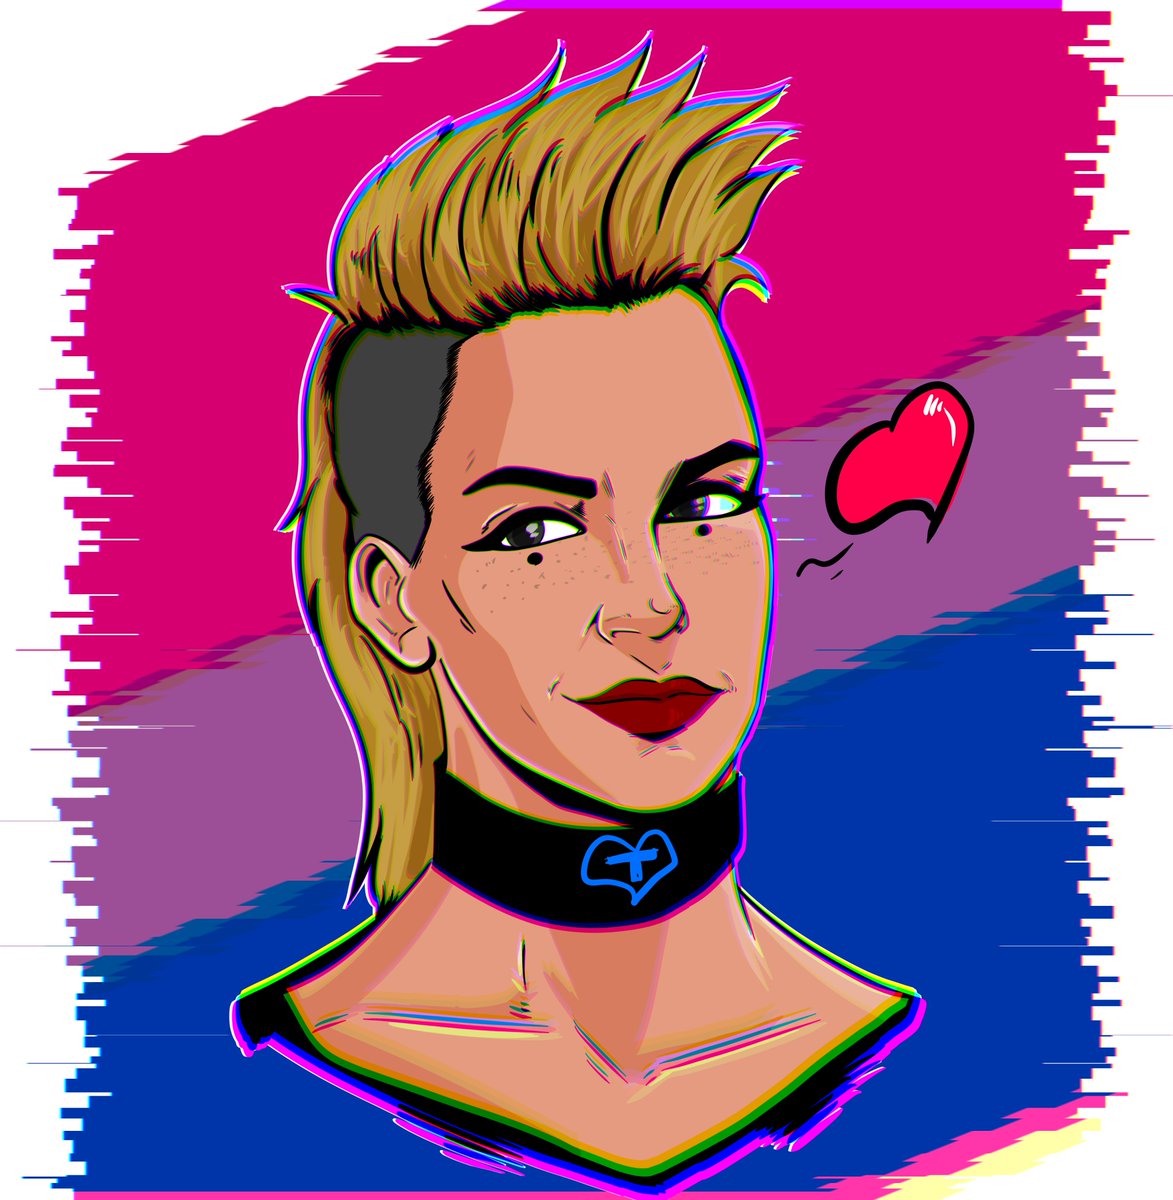 Got this amazing piece of art from @IValrez 🥹

Princess 8uggie wishes a Happy Pride Month and the way she looks, I'm sure she's eyeing her waifu right now <3

Thank you so much, Little Rat! 💙🐀

#8ug8ear #art #PrideMonth2023 #Cyberpunk2077